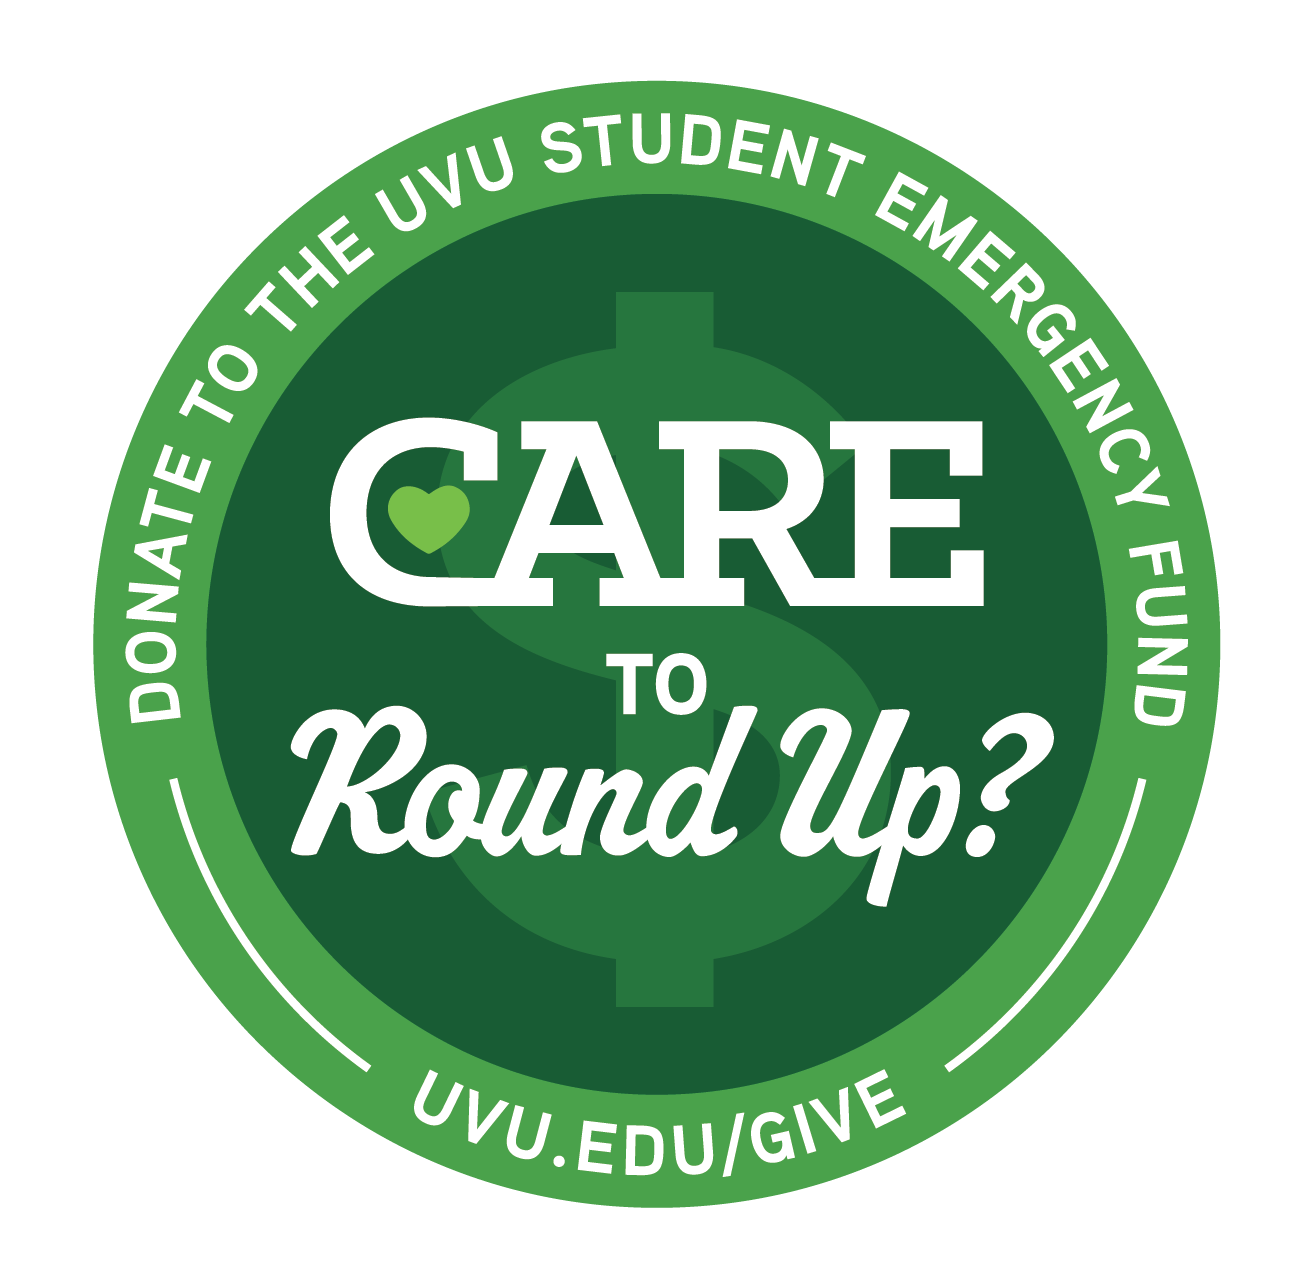 round up campaign logo